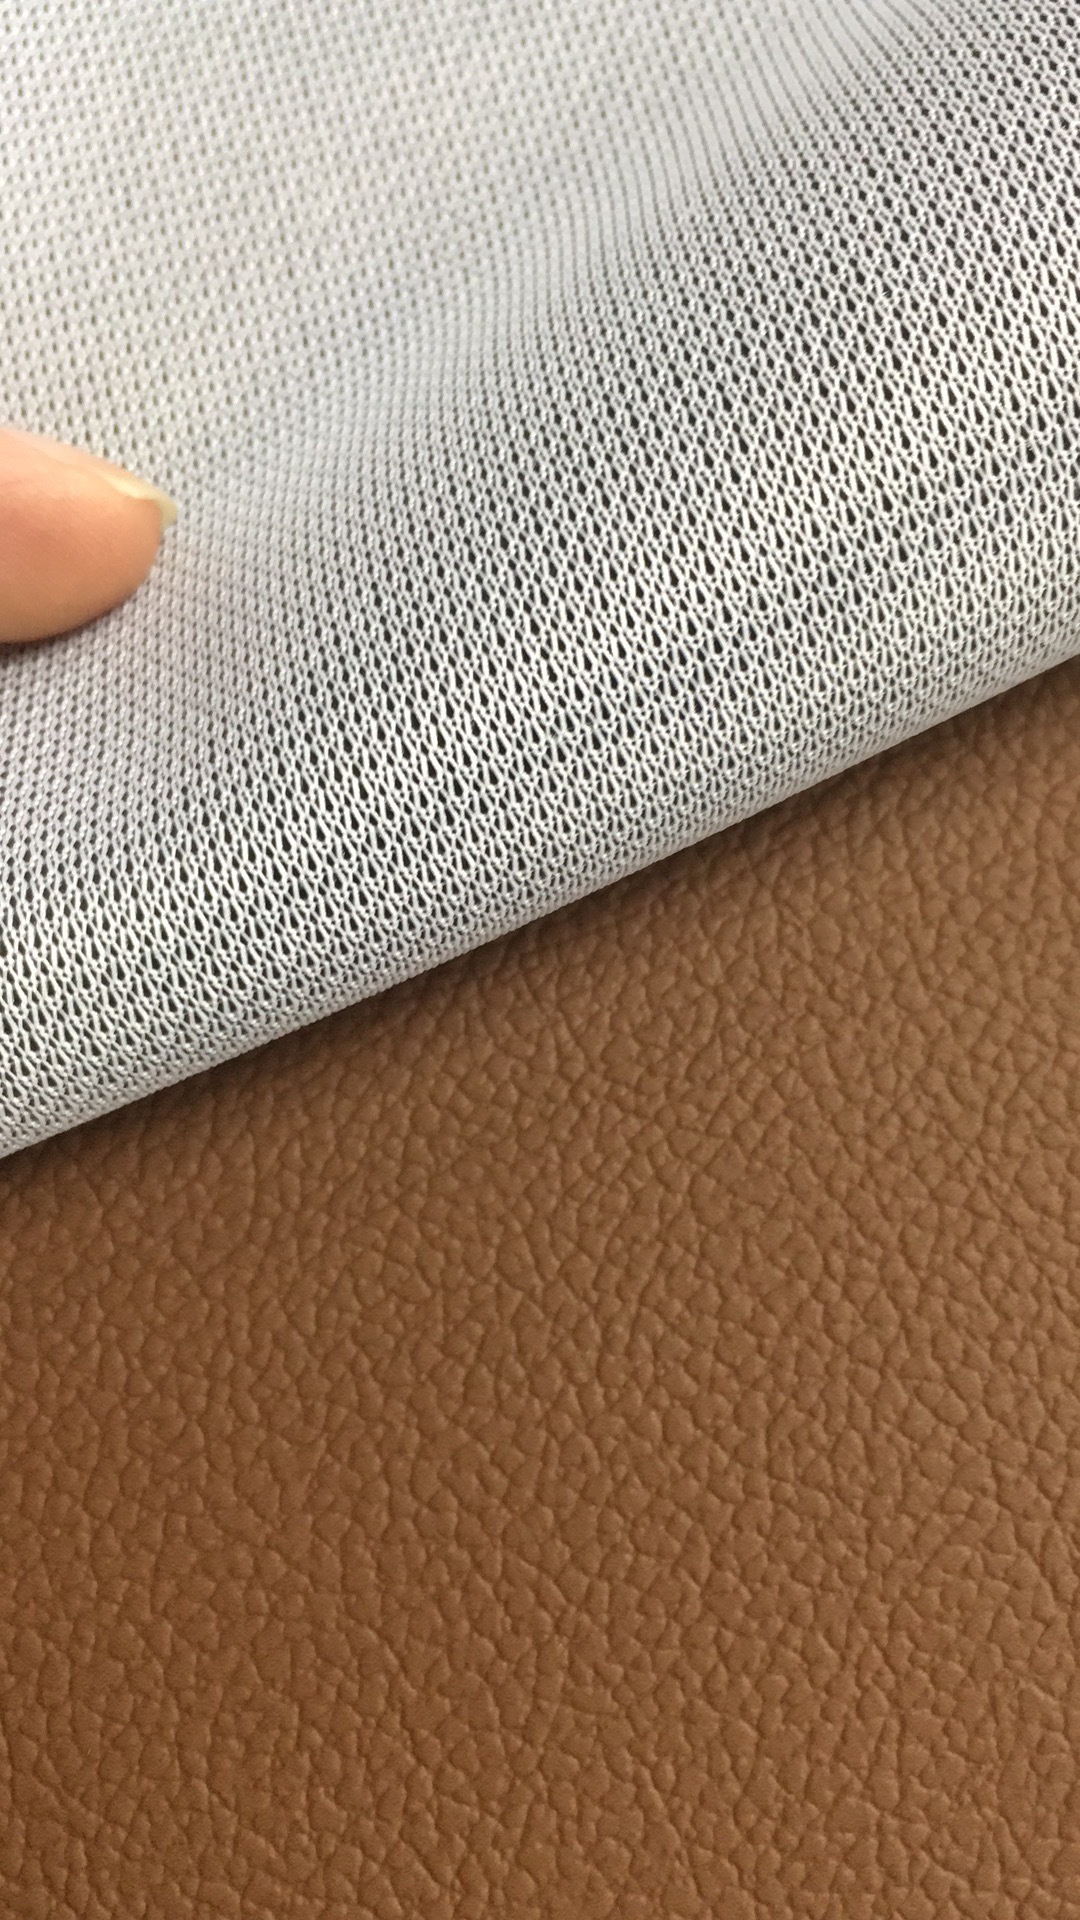 Microfiber Leather Manufacturing, Is Microfiber Leather Good